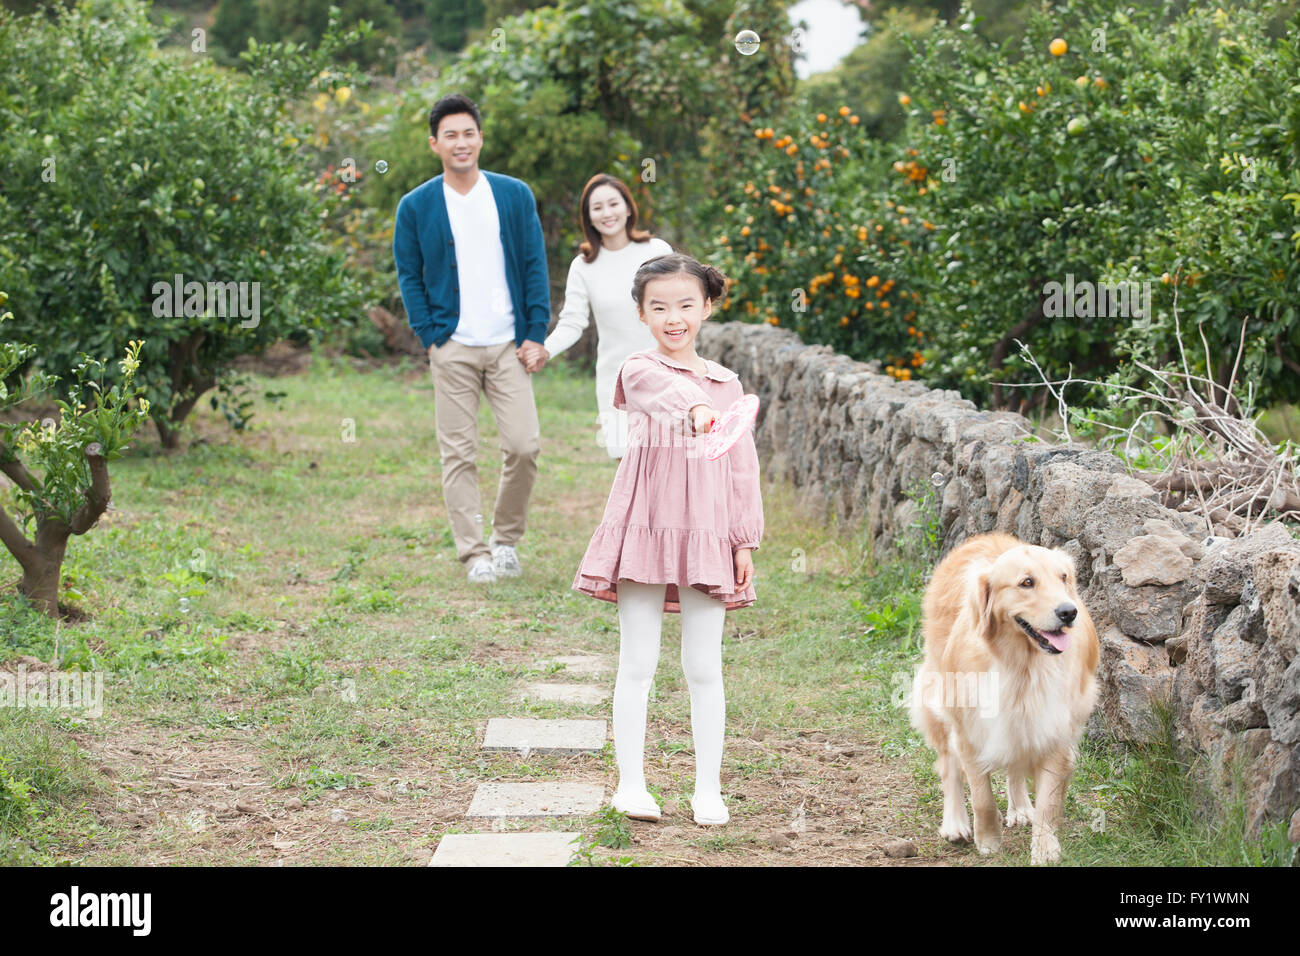 Family with a dog walking together outside near the tangerine field representing rural life Stock Photo